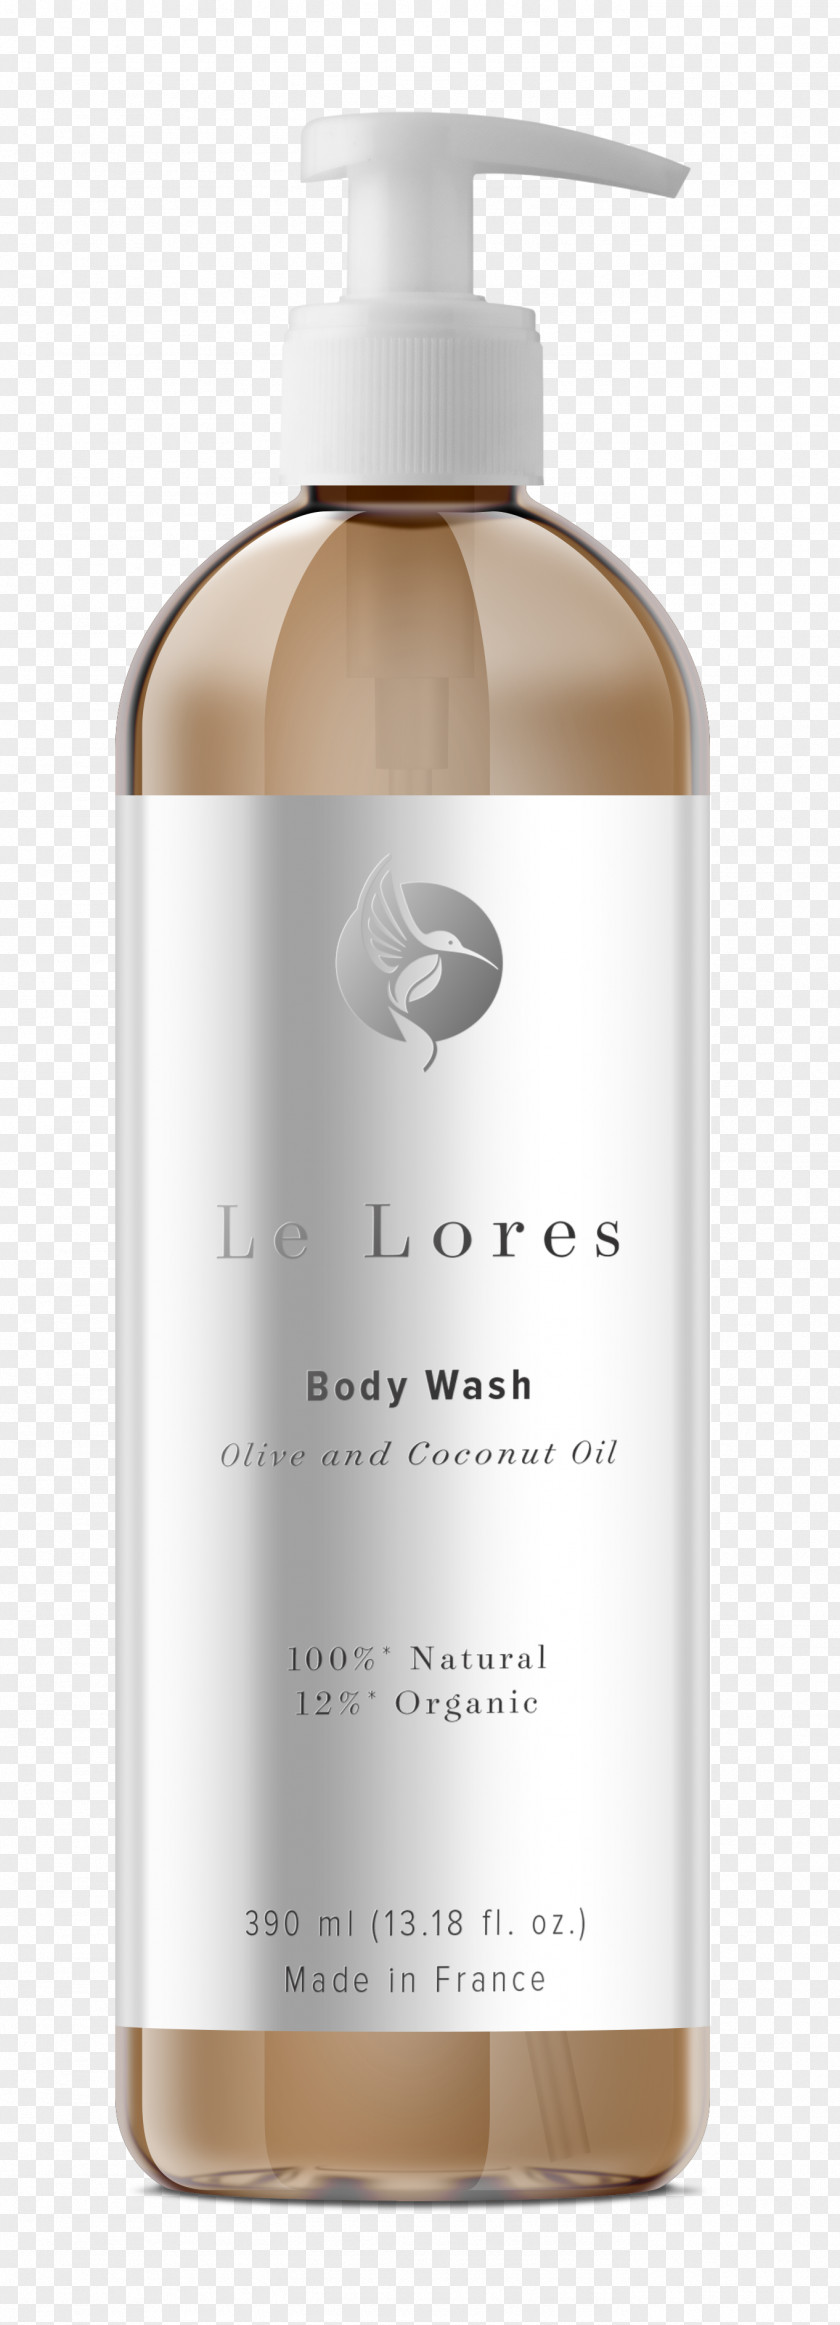 Body Wash Lotion Hand Washing Le Lores PNG